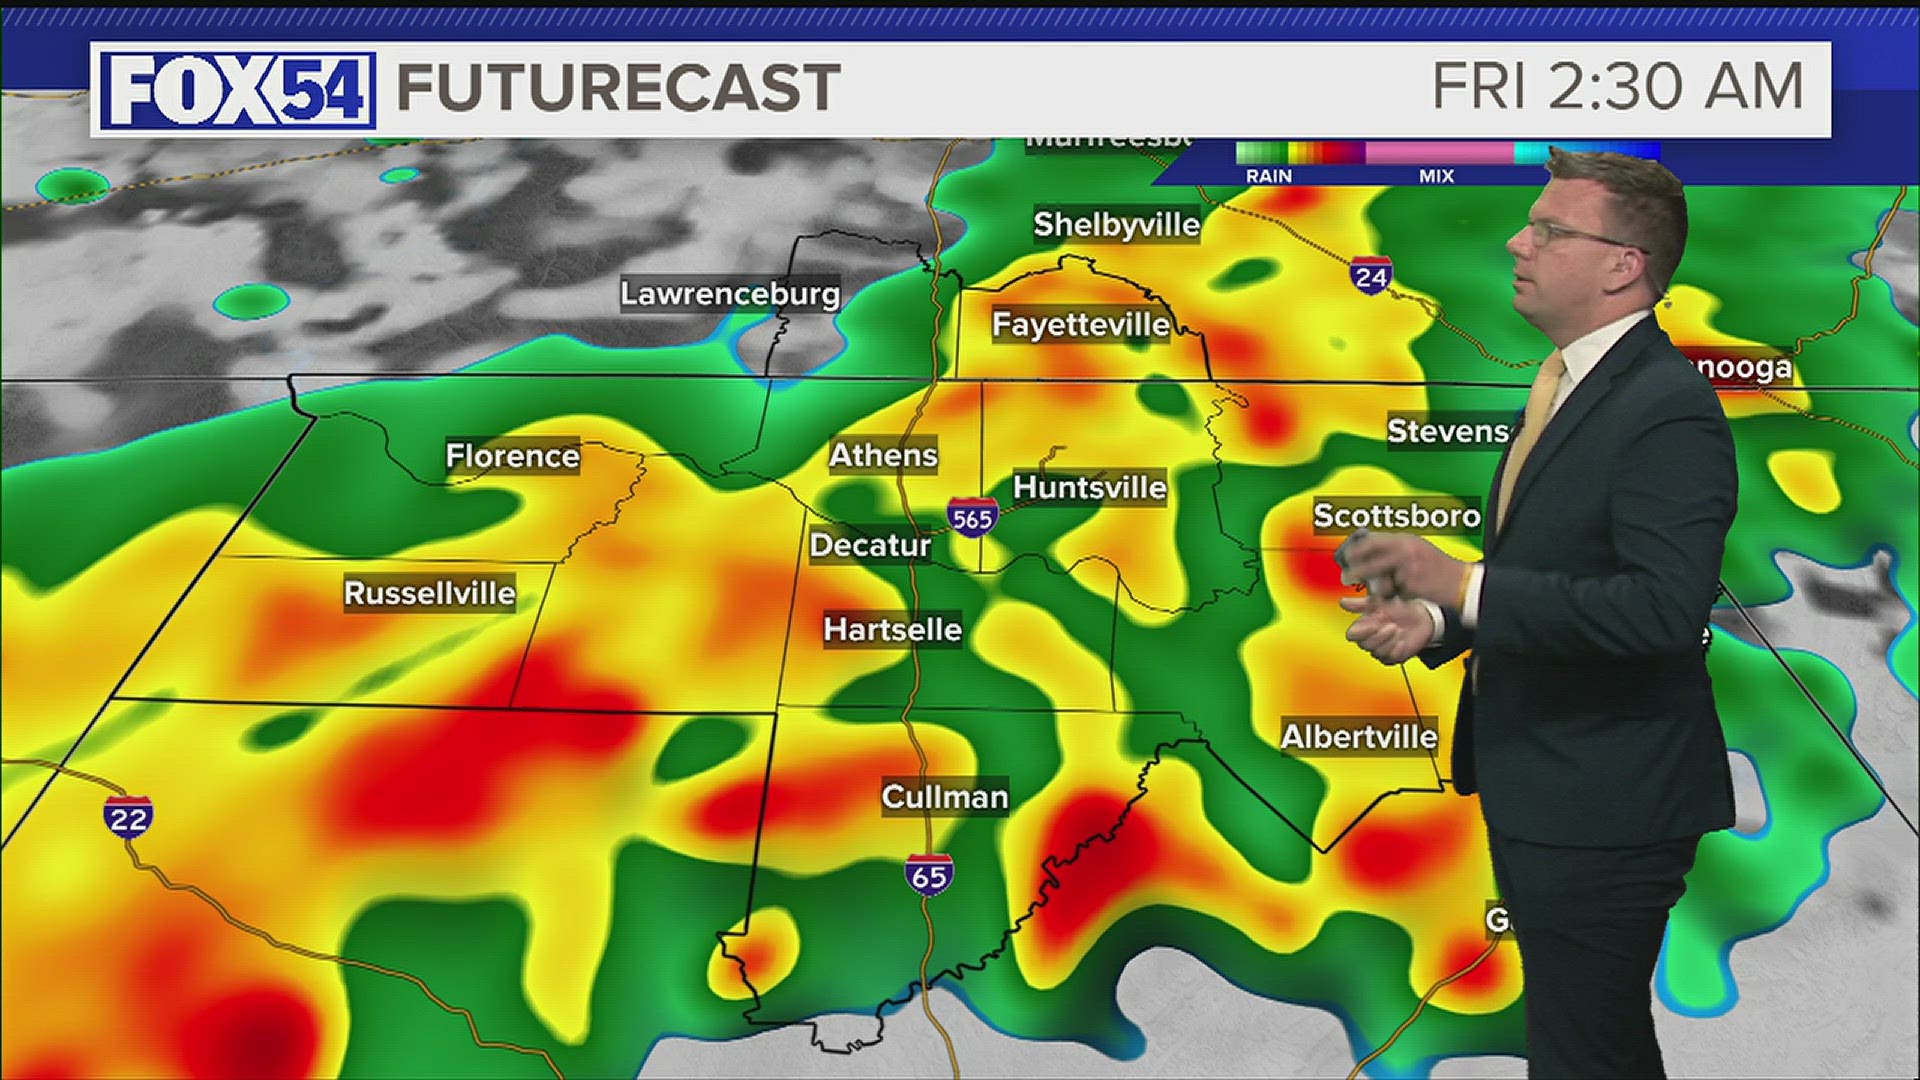 Showers and thunderstorms in the forecast as we finish the week and head into the weekend. Some storms could be strong.